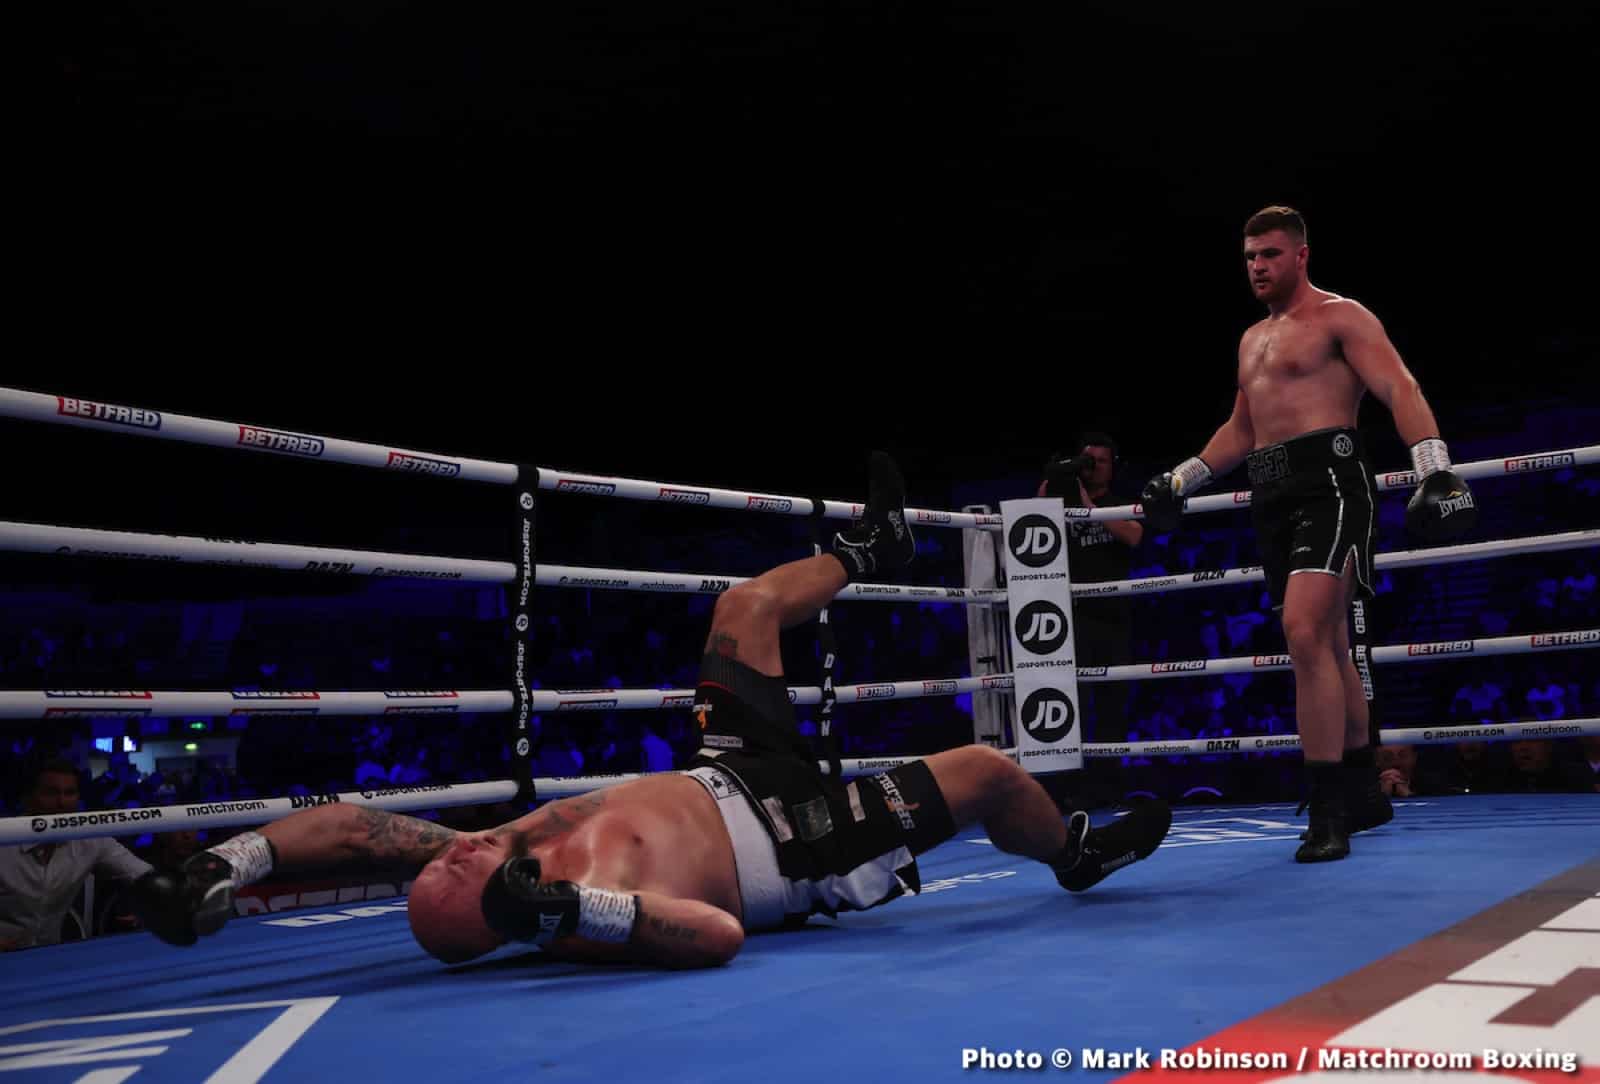 Boxing Results boxing image / photo